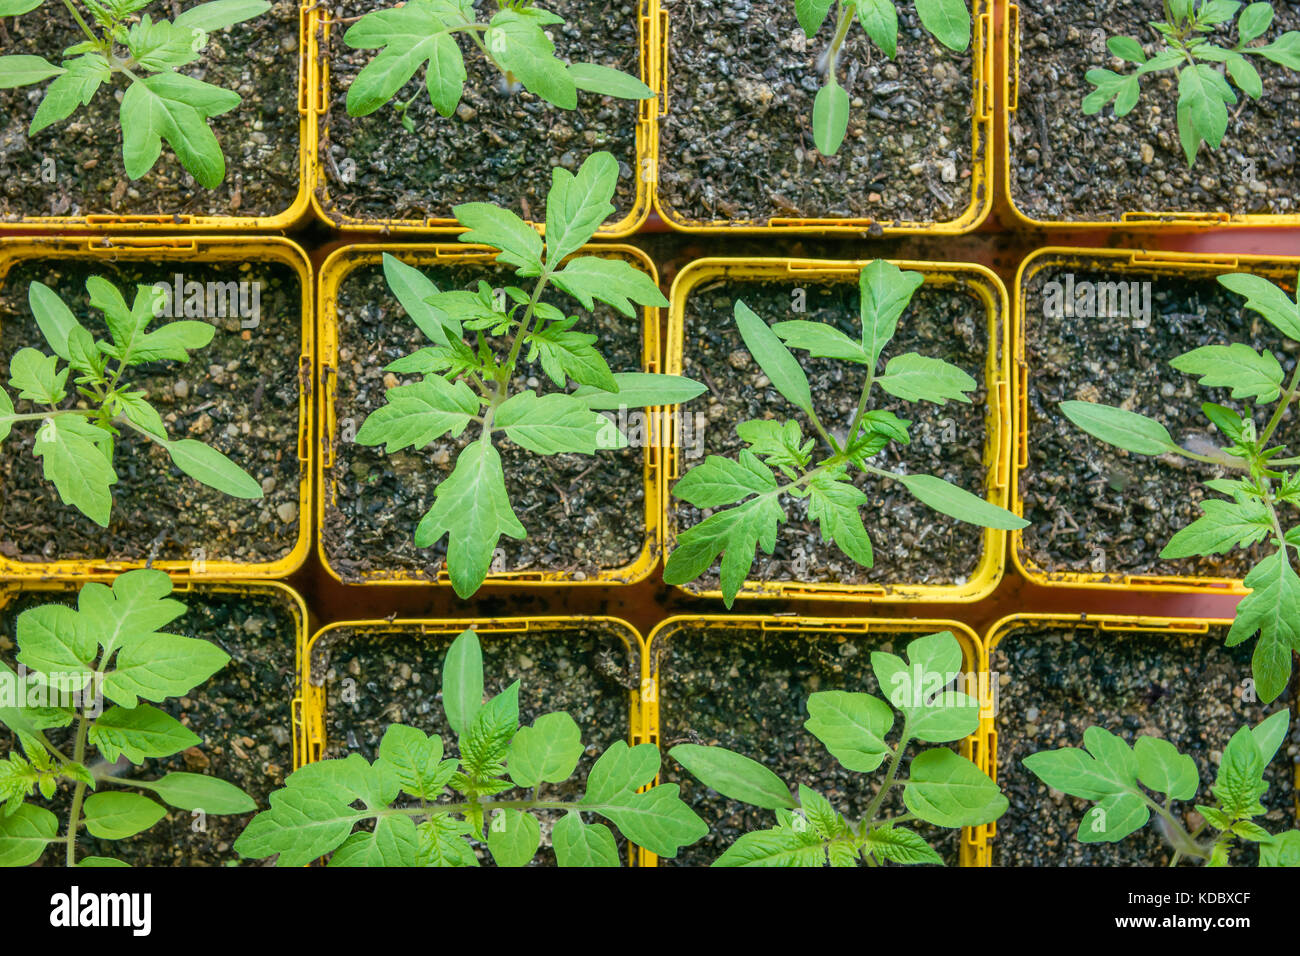 Tomato seedlings in yellow cups. Young green plants in April. France Stock Photo